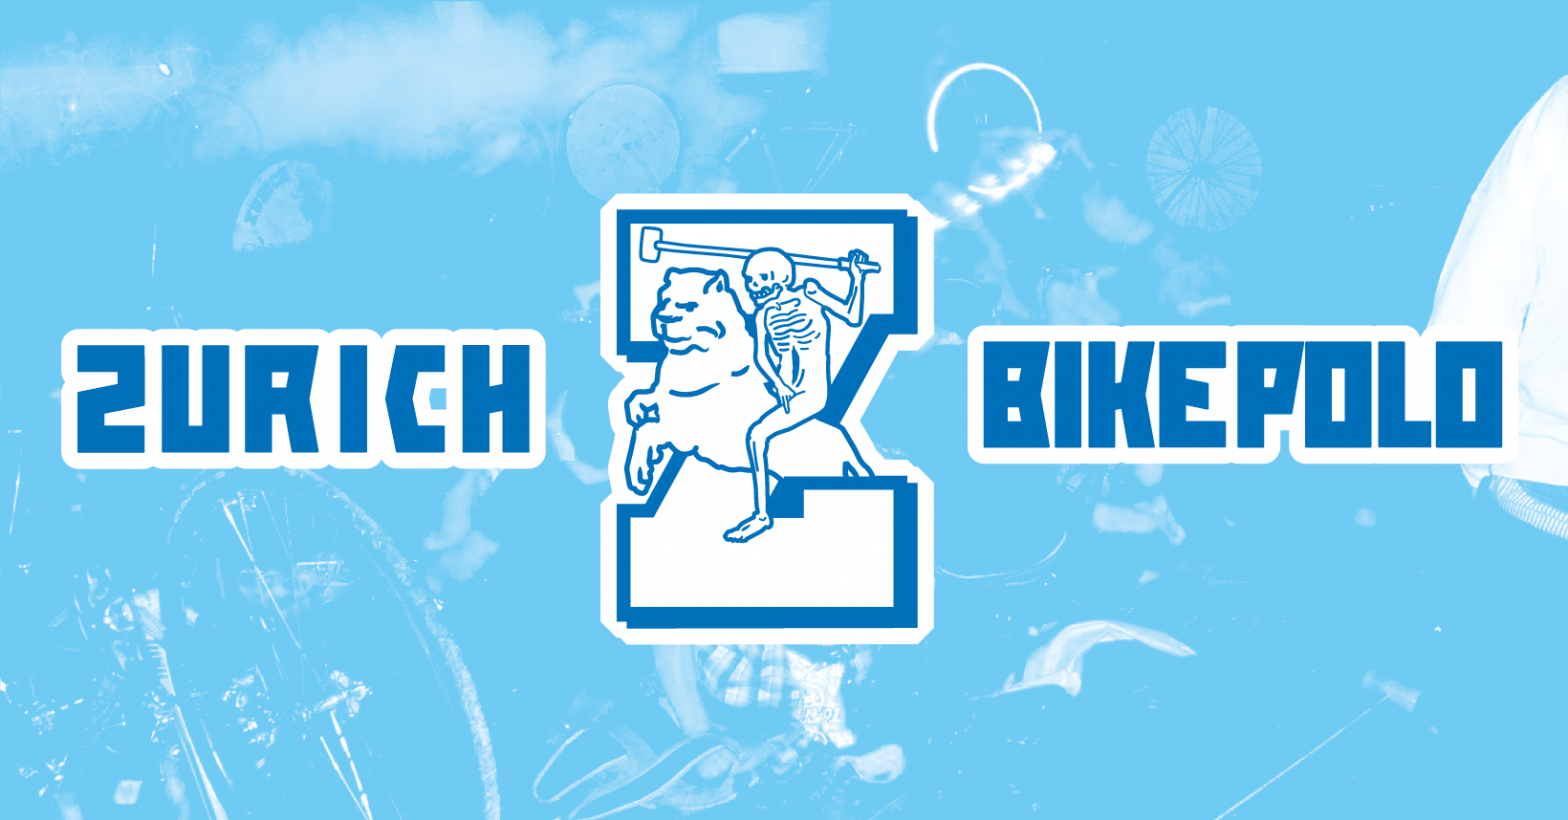 zurich bike polo logo, skeleton riding a horse swinging a mallet and flippin the bird